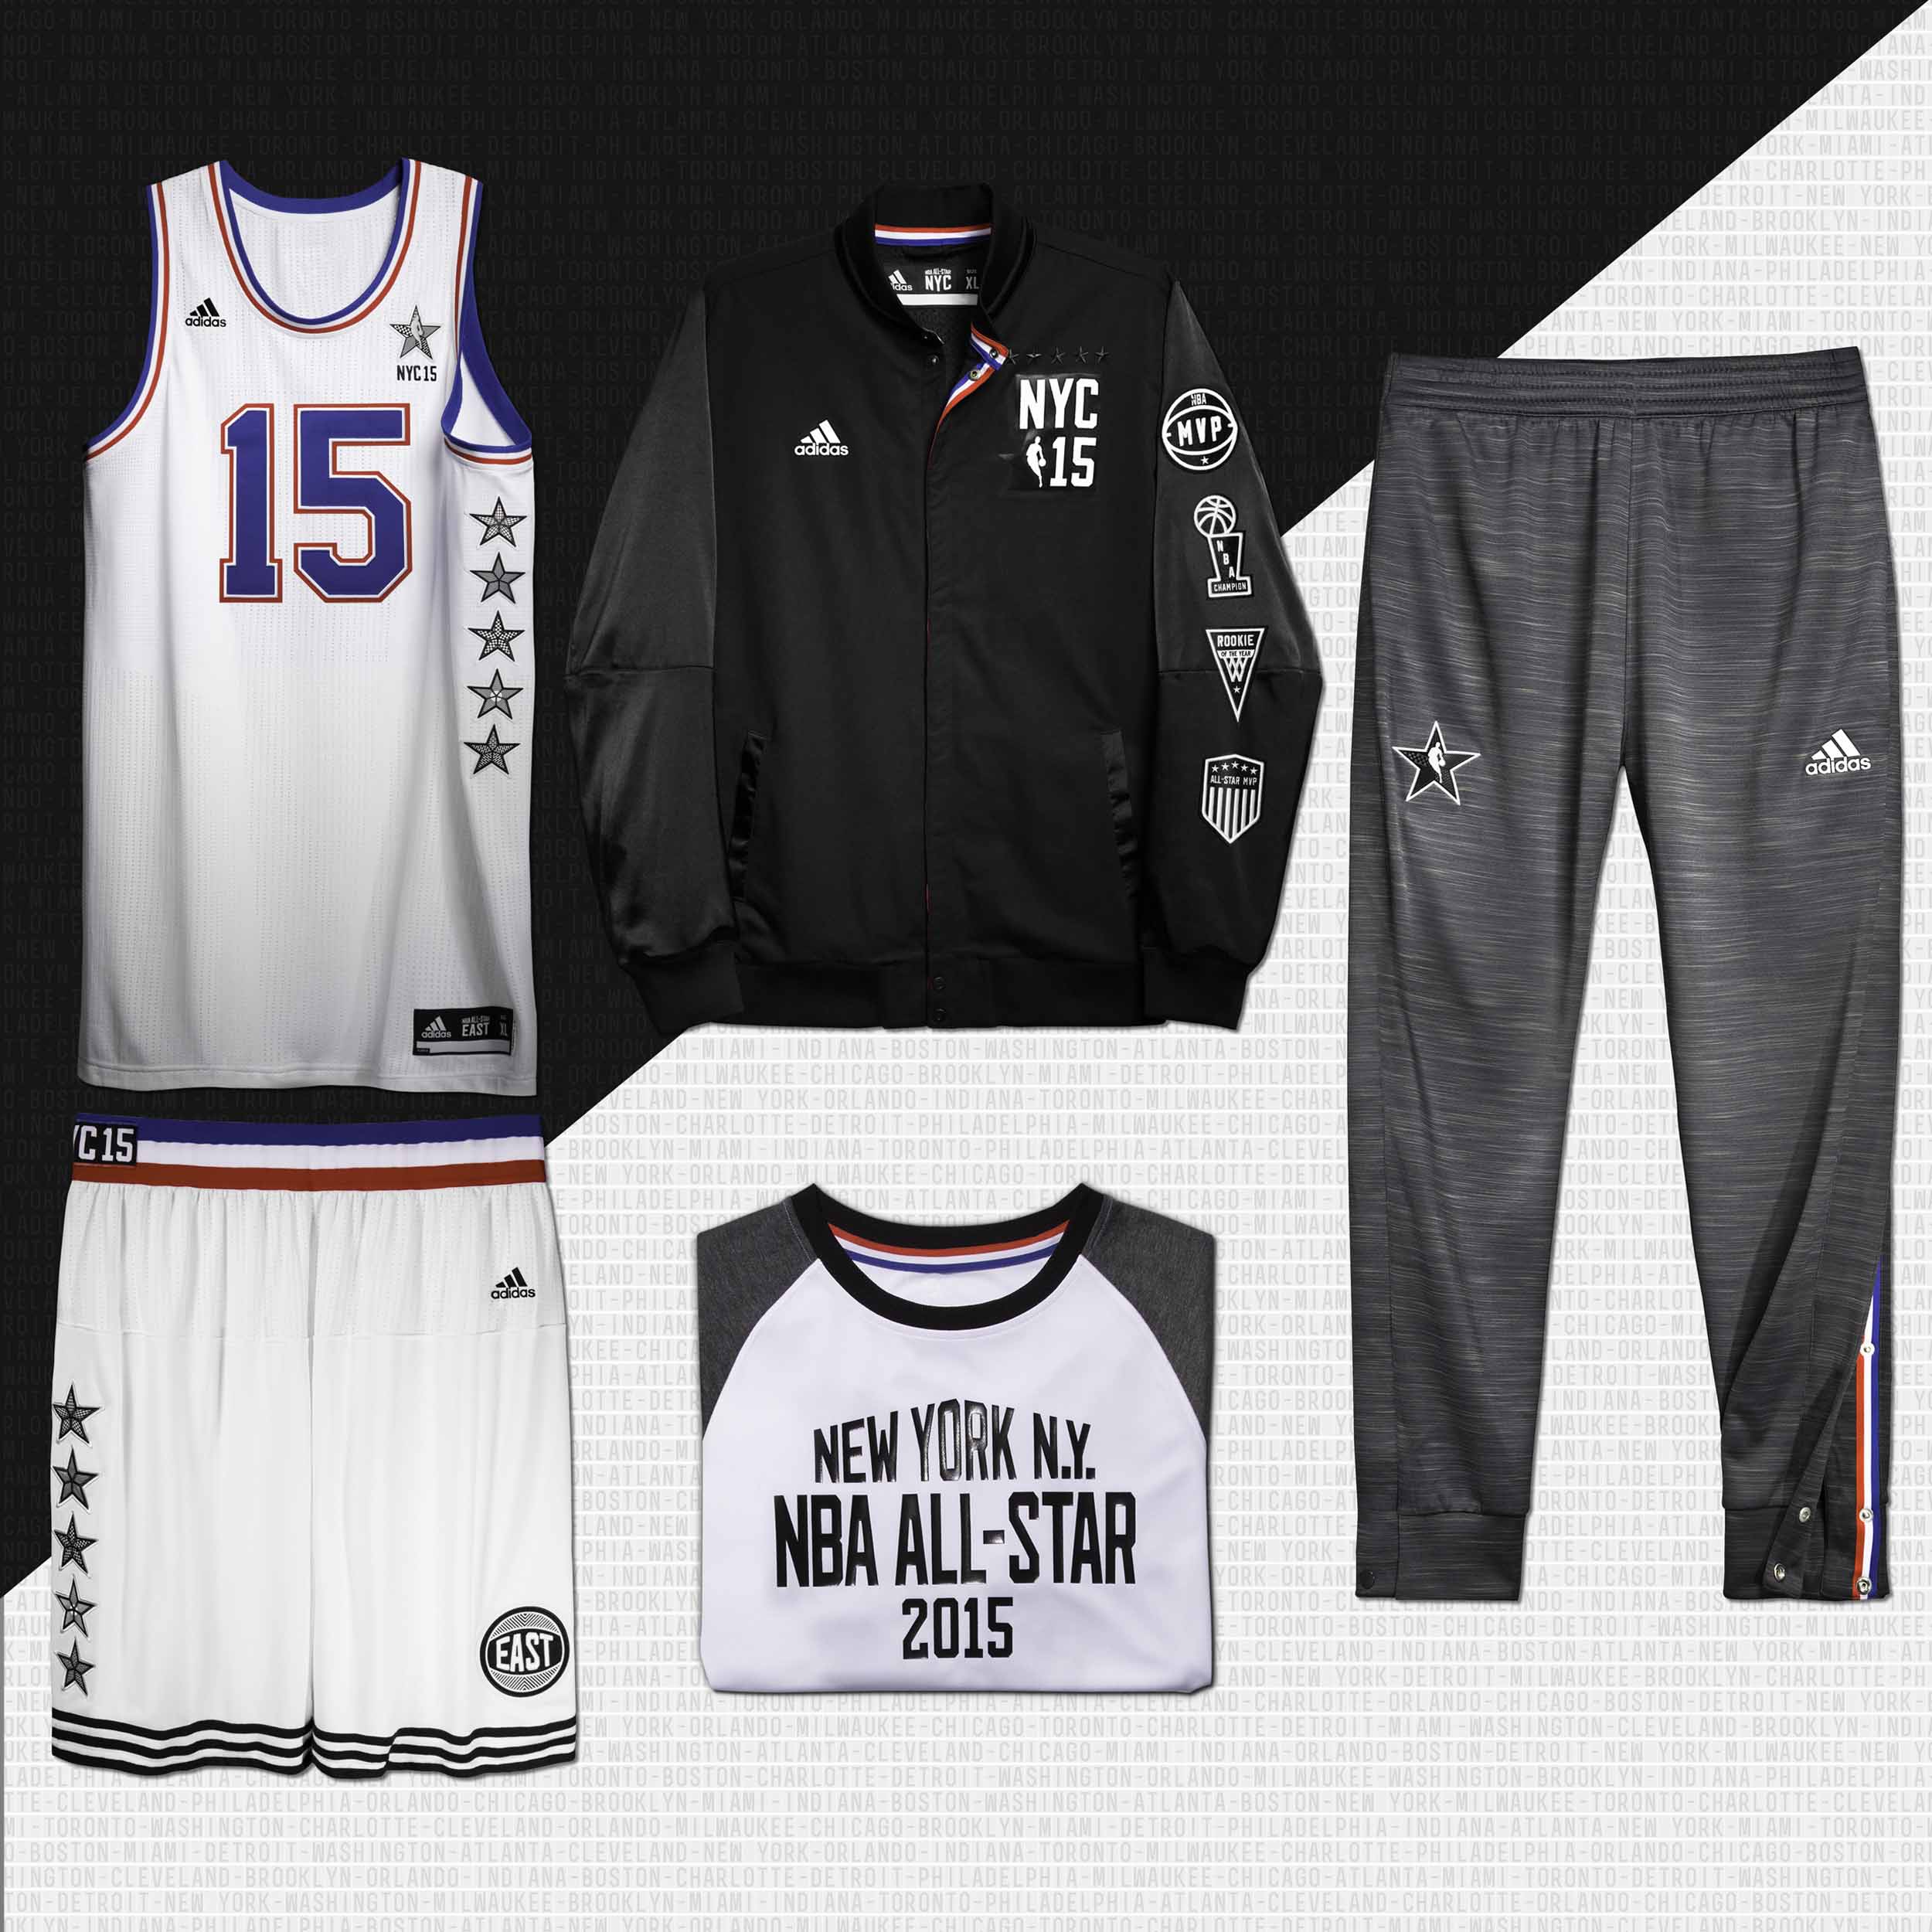 adidas NBA All-Star Collection Lay Down East, Sq